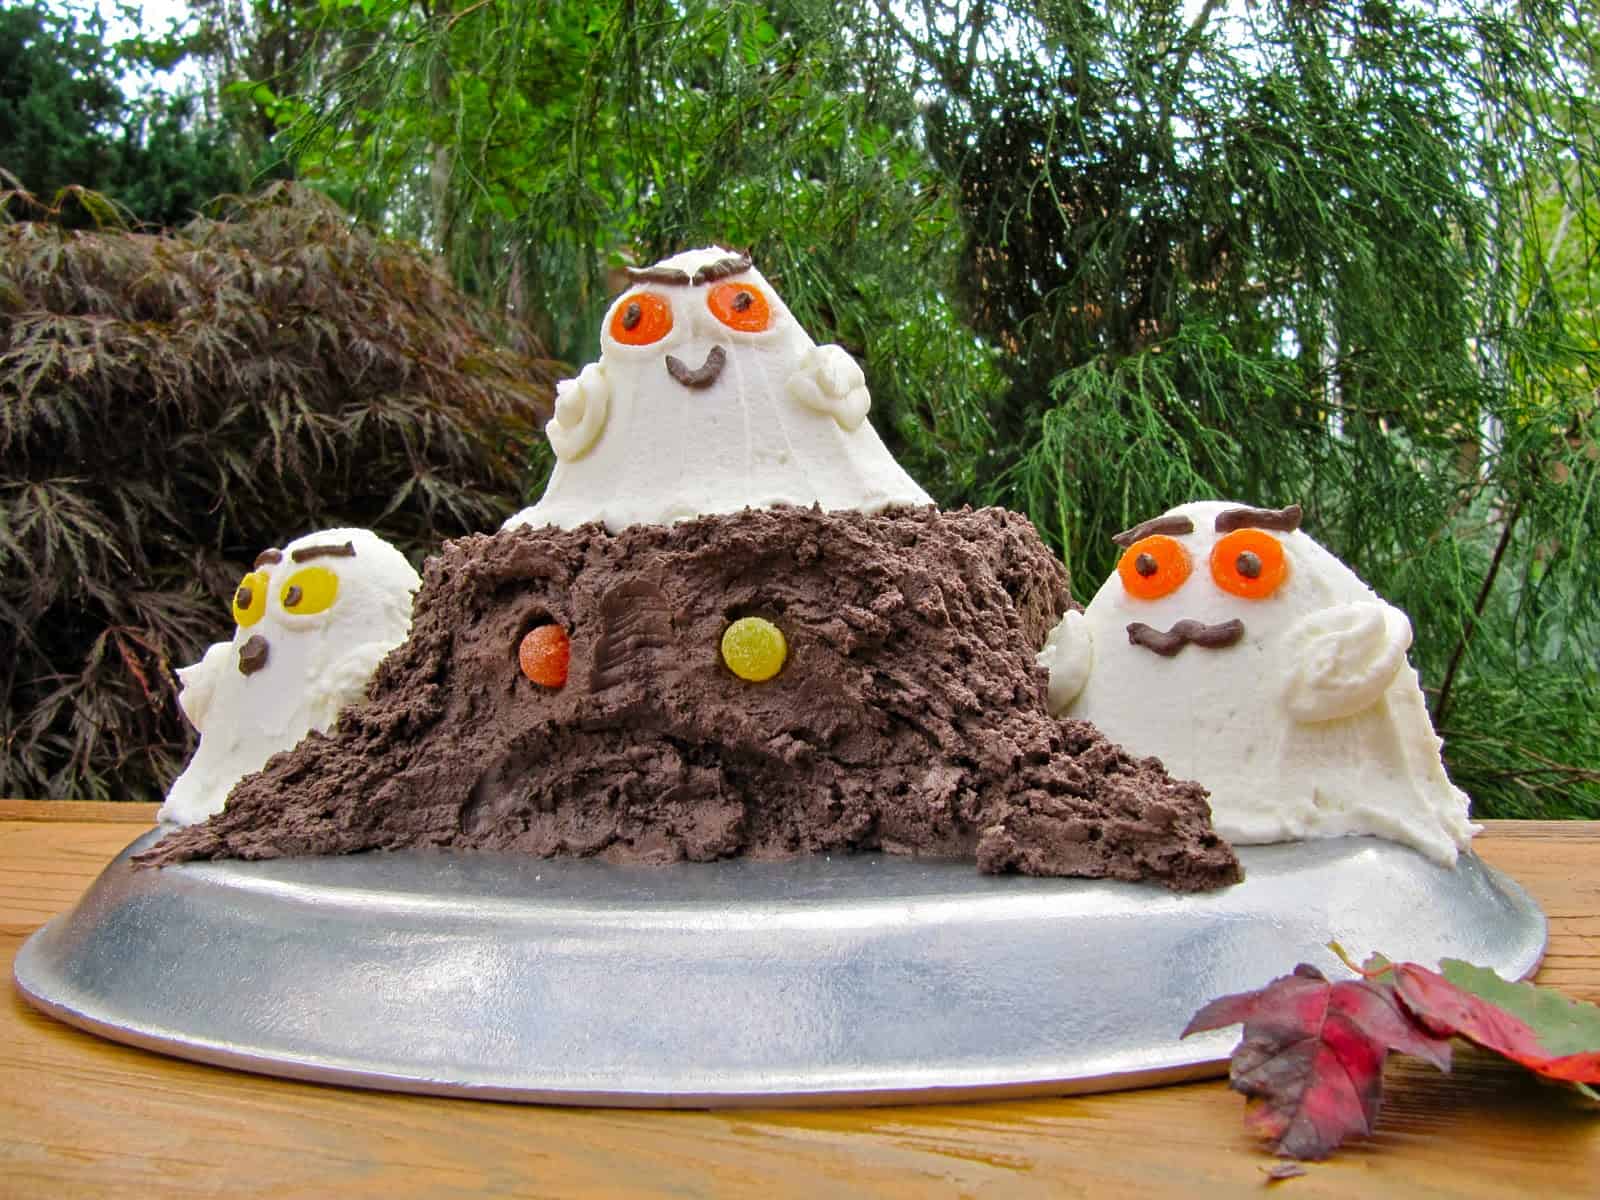 Ghost Smash Cake - Pastries by Randolph